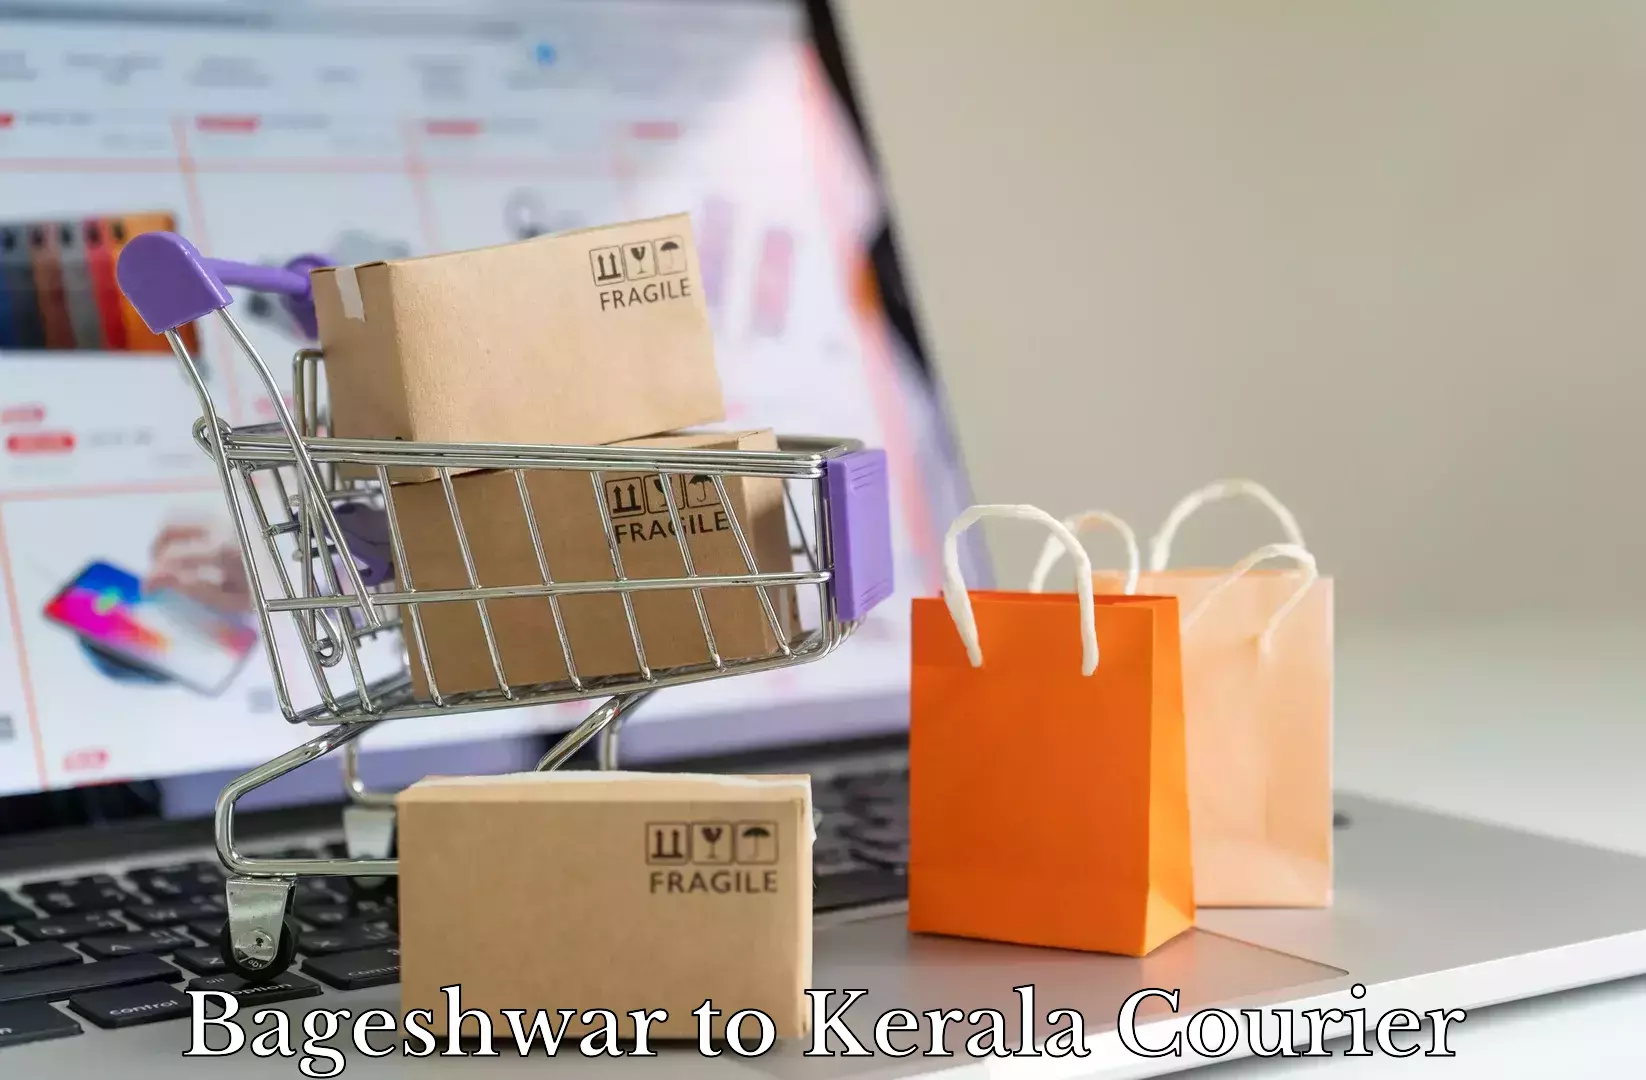 Moving and packing experts Bageshwar to Kerala